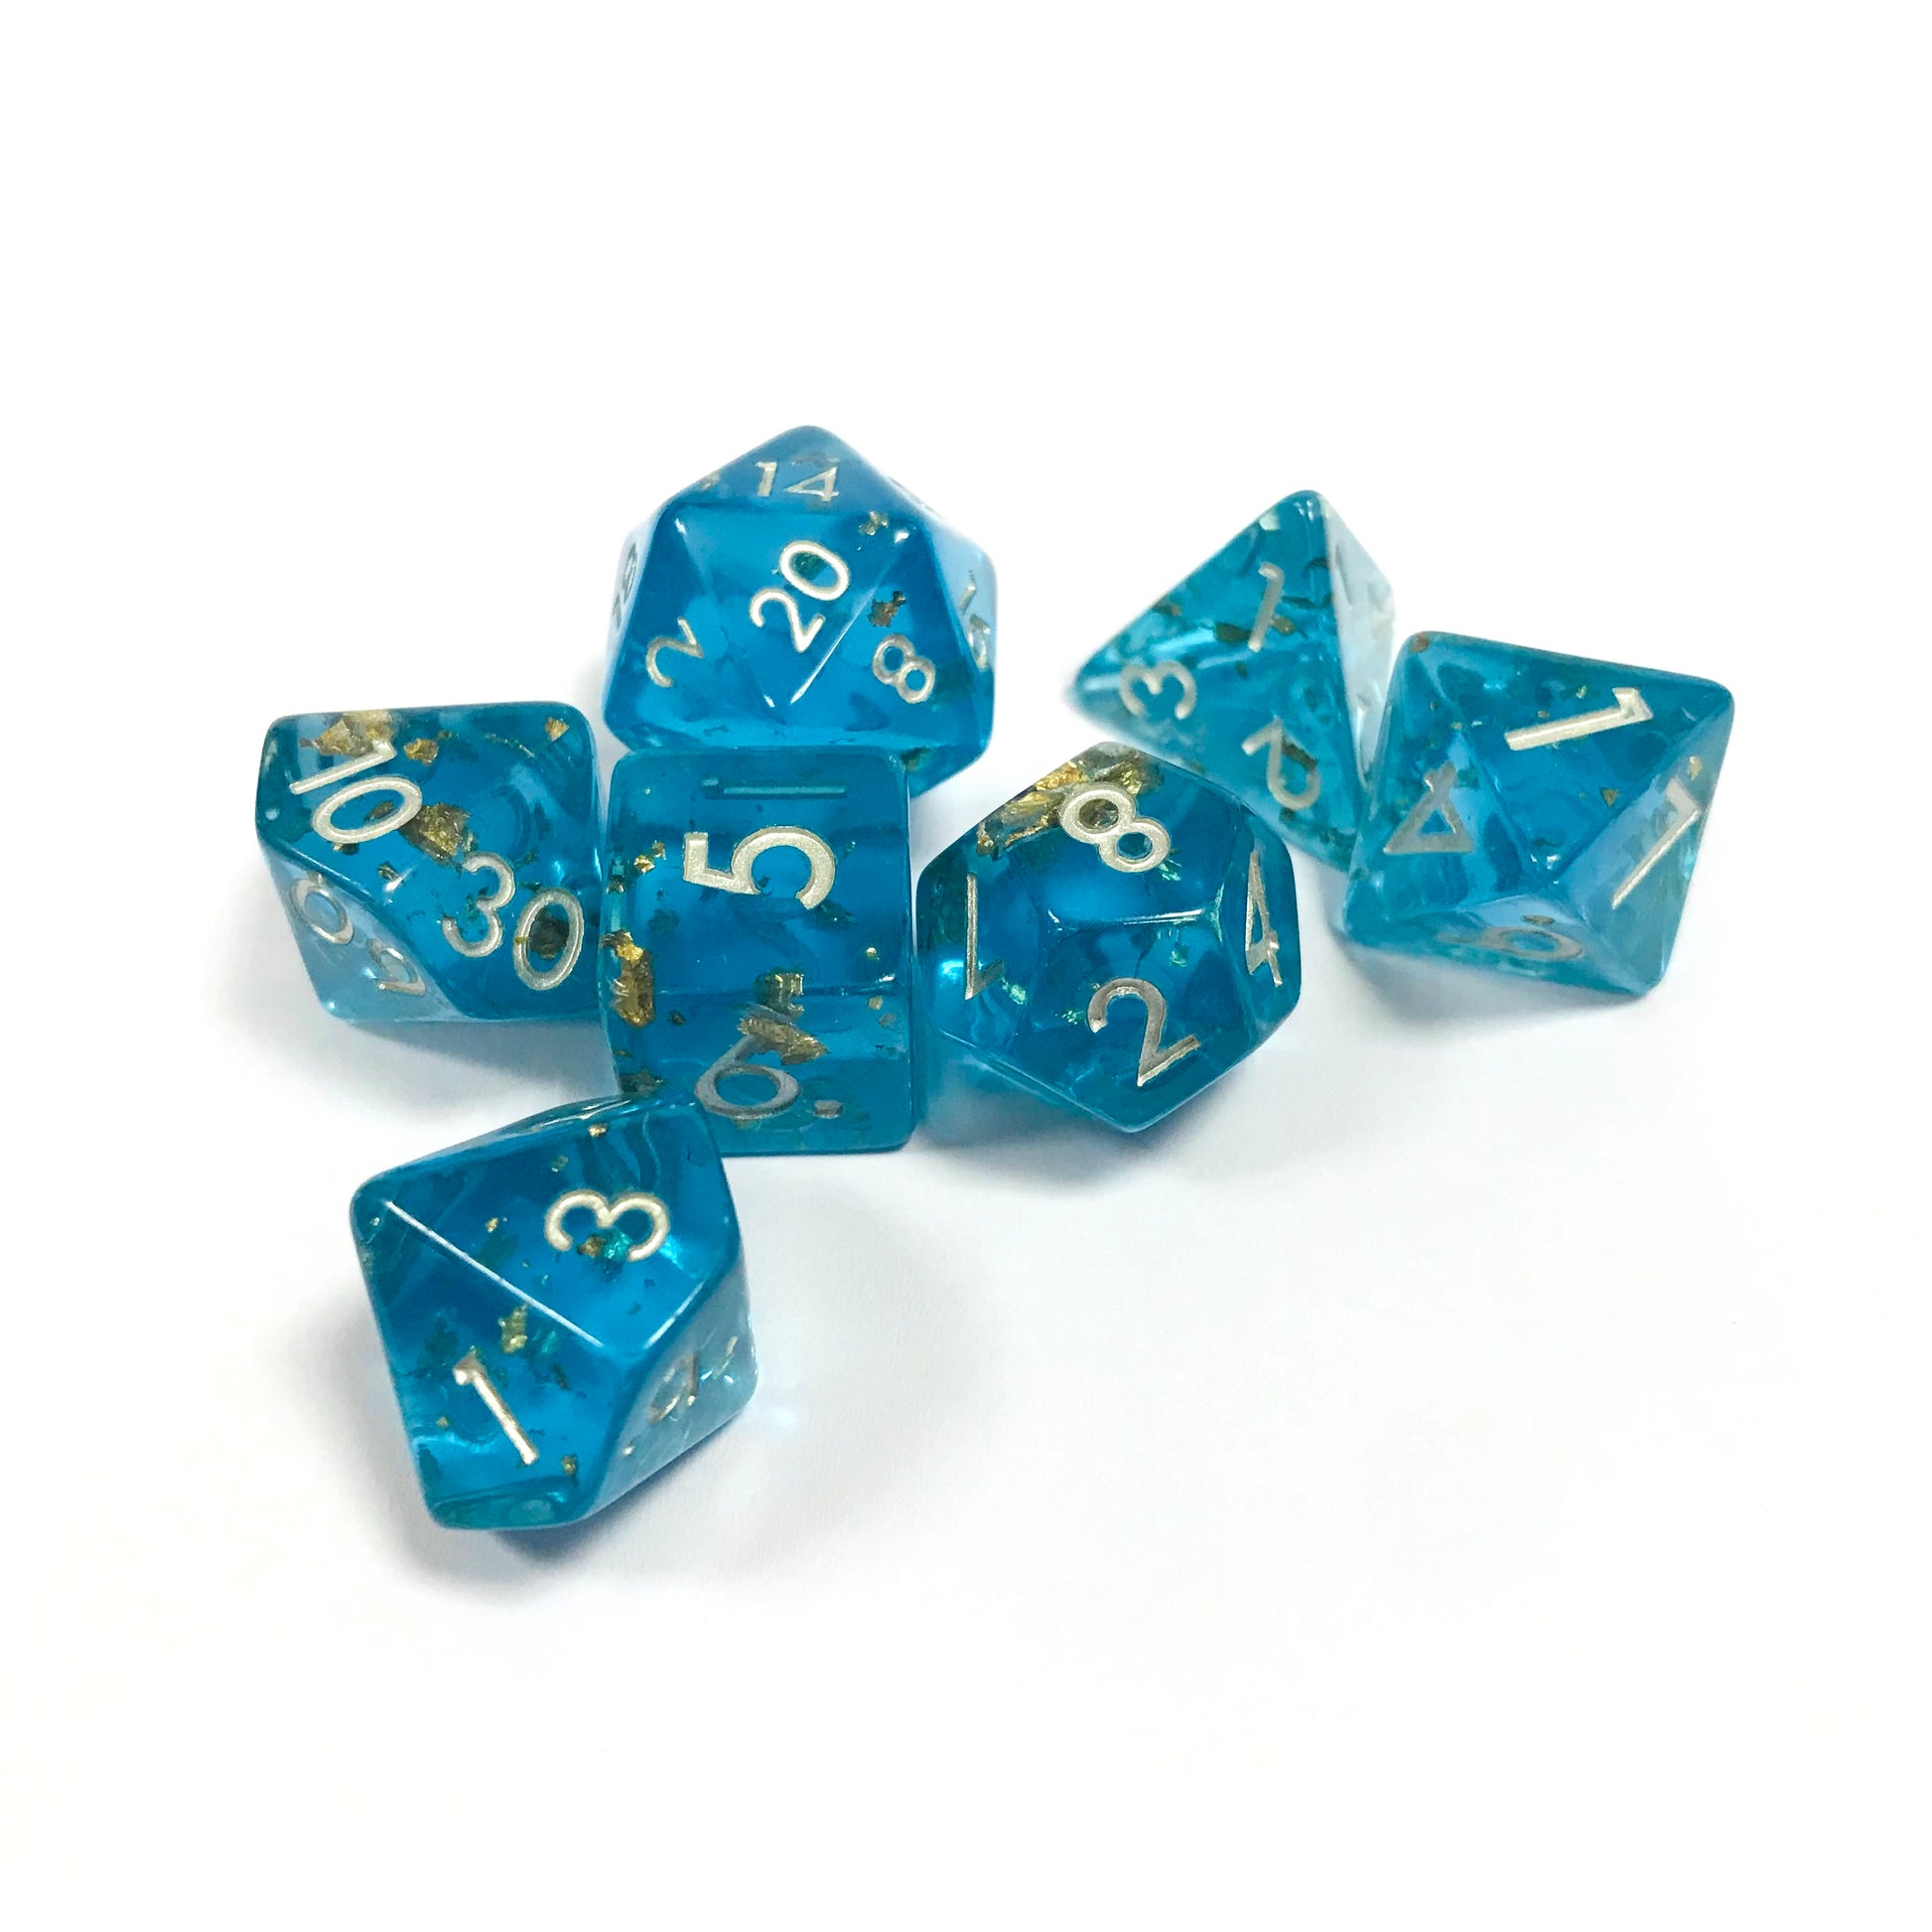 translucent blue dnd dice for TTRPG role playing games, dice goblins and dice dragons